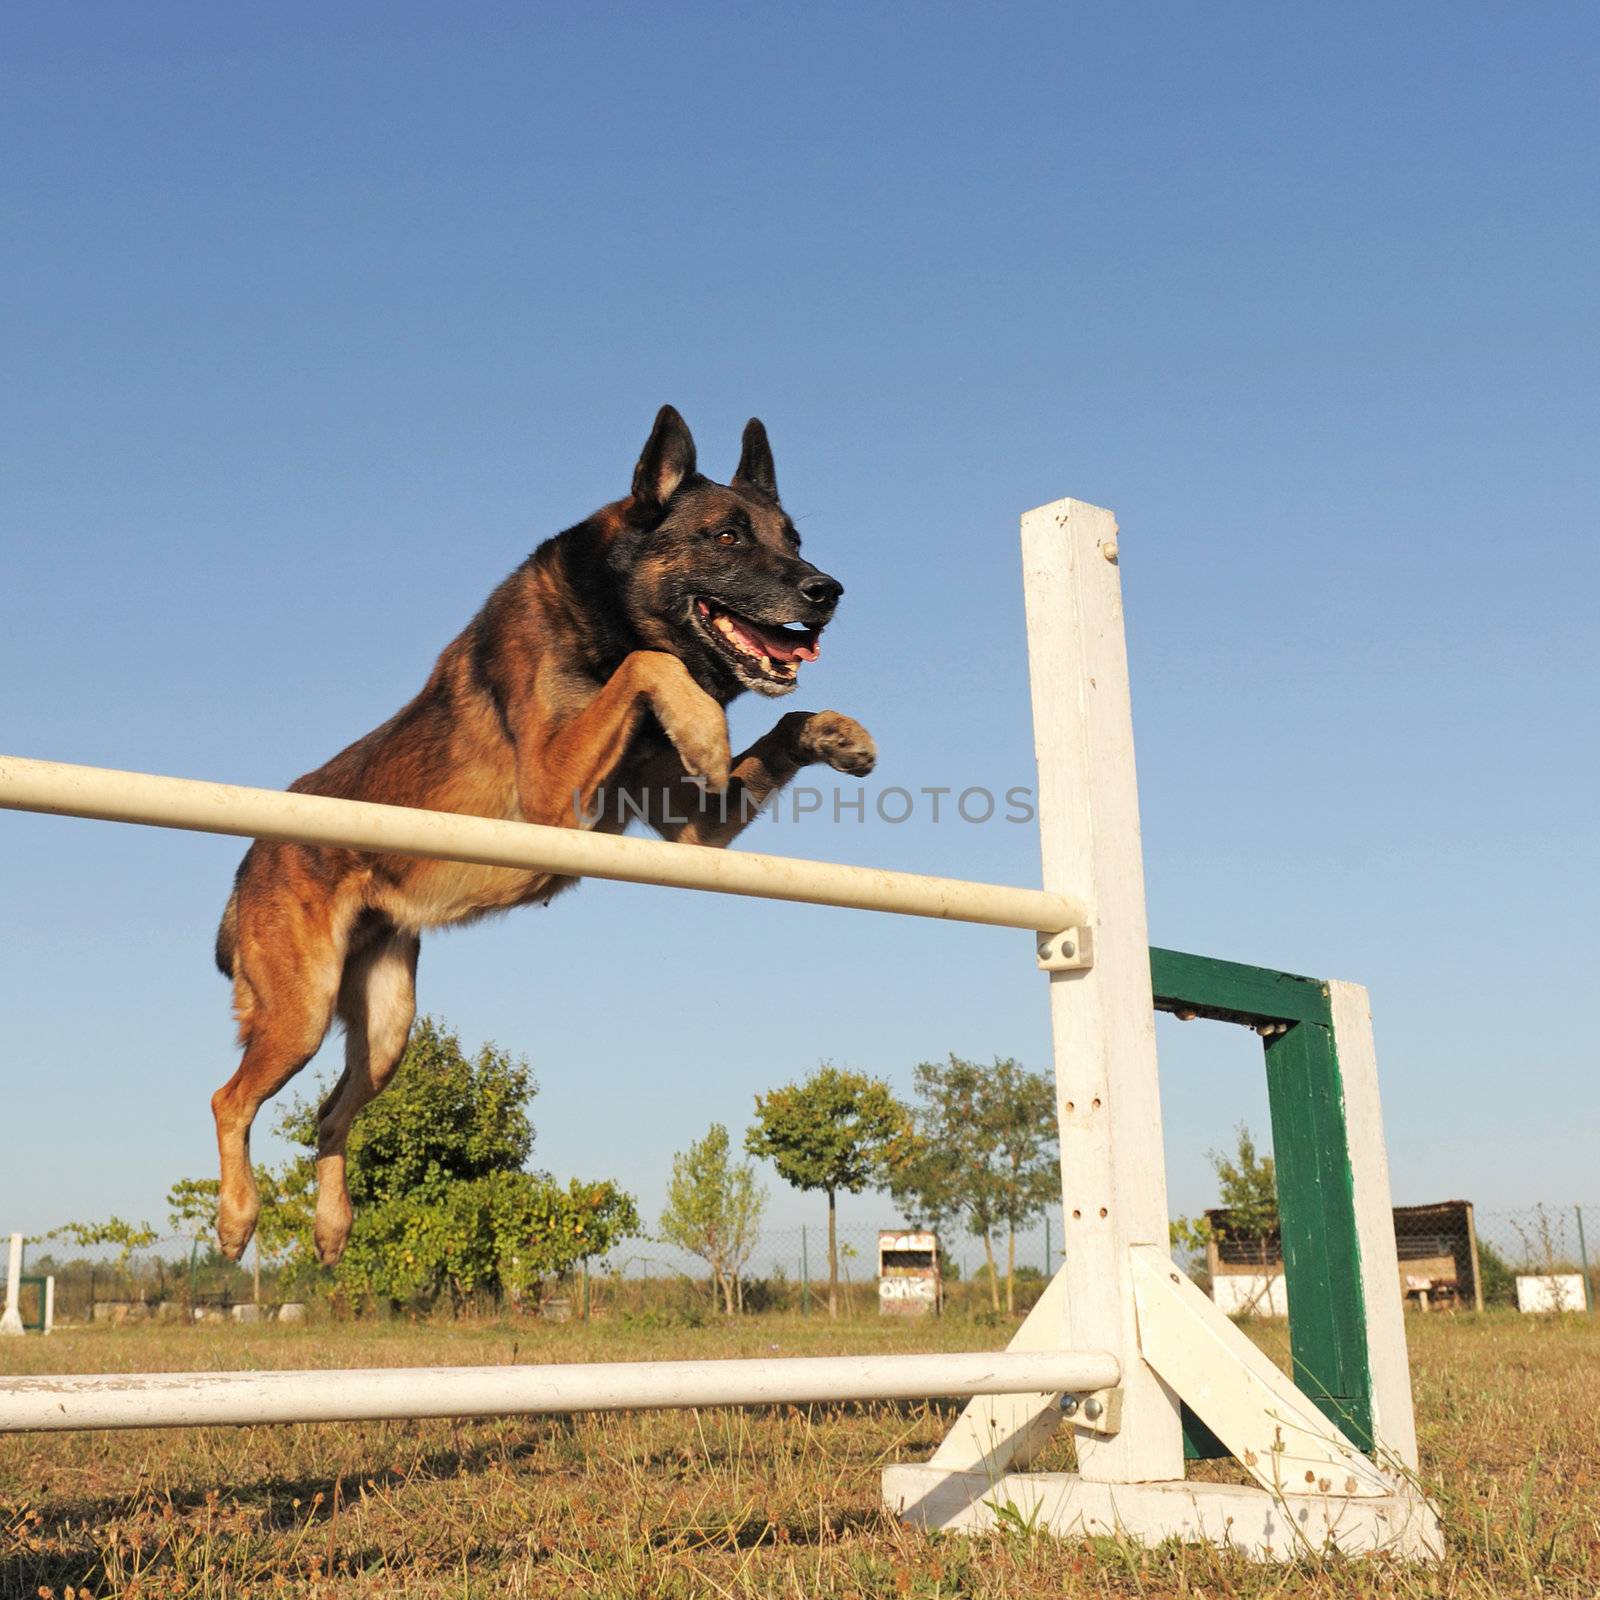  purebred belgian sheepdgog malinois in a training of agility